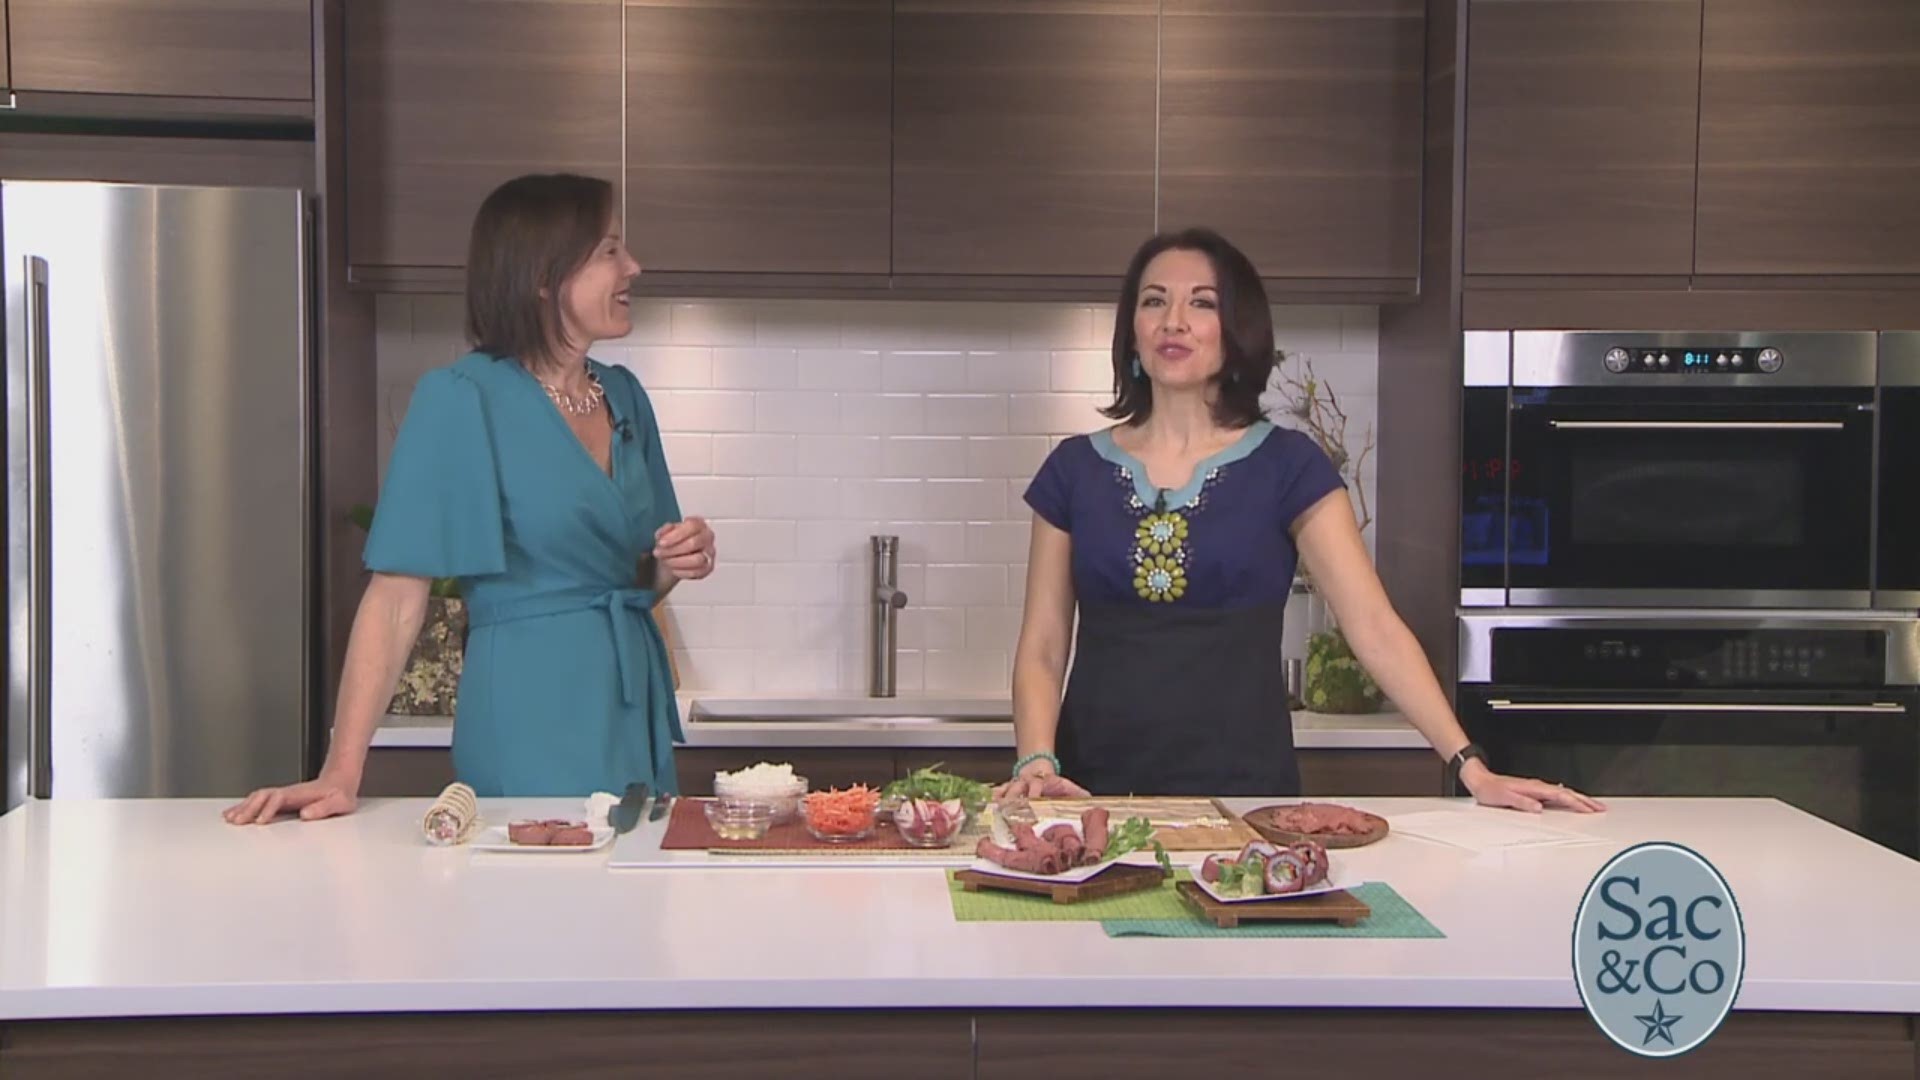 There’s so much hype around “summertime slim downs” and foods to cut out – but today Registered Dietitian Katie Ferraro has partnered with Grain Foods Foundation, Farmer John Pork and REBBL to show you some smart foods to keep IN your diet this summer! The following is a paid segment sponsored by Ingrain Health, Inc.